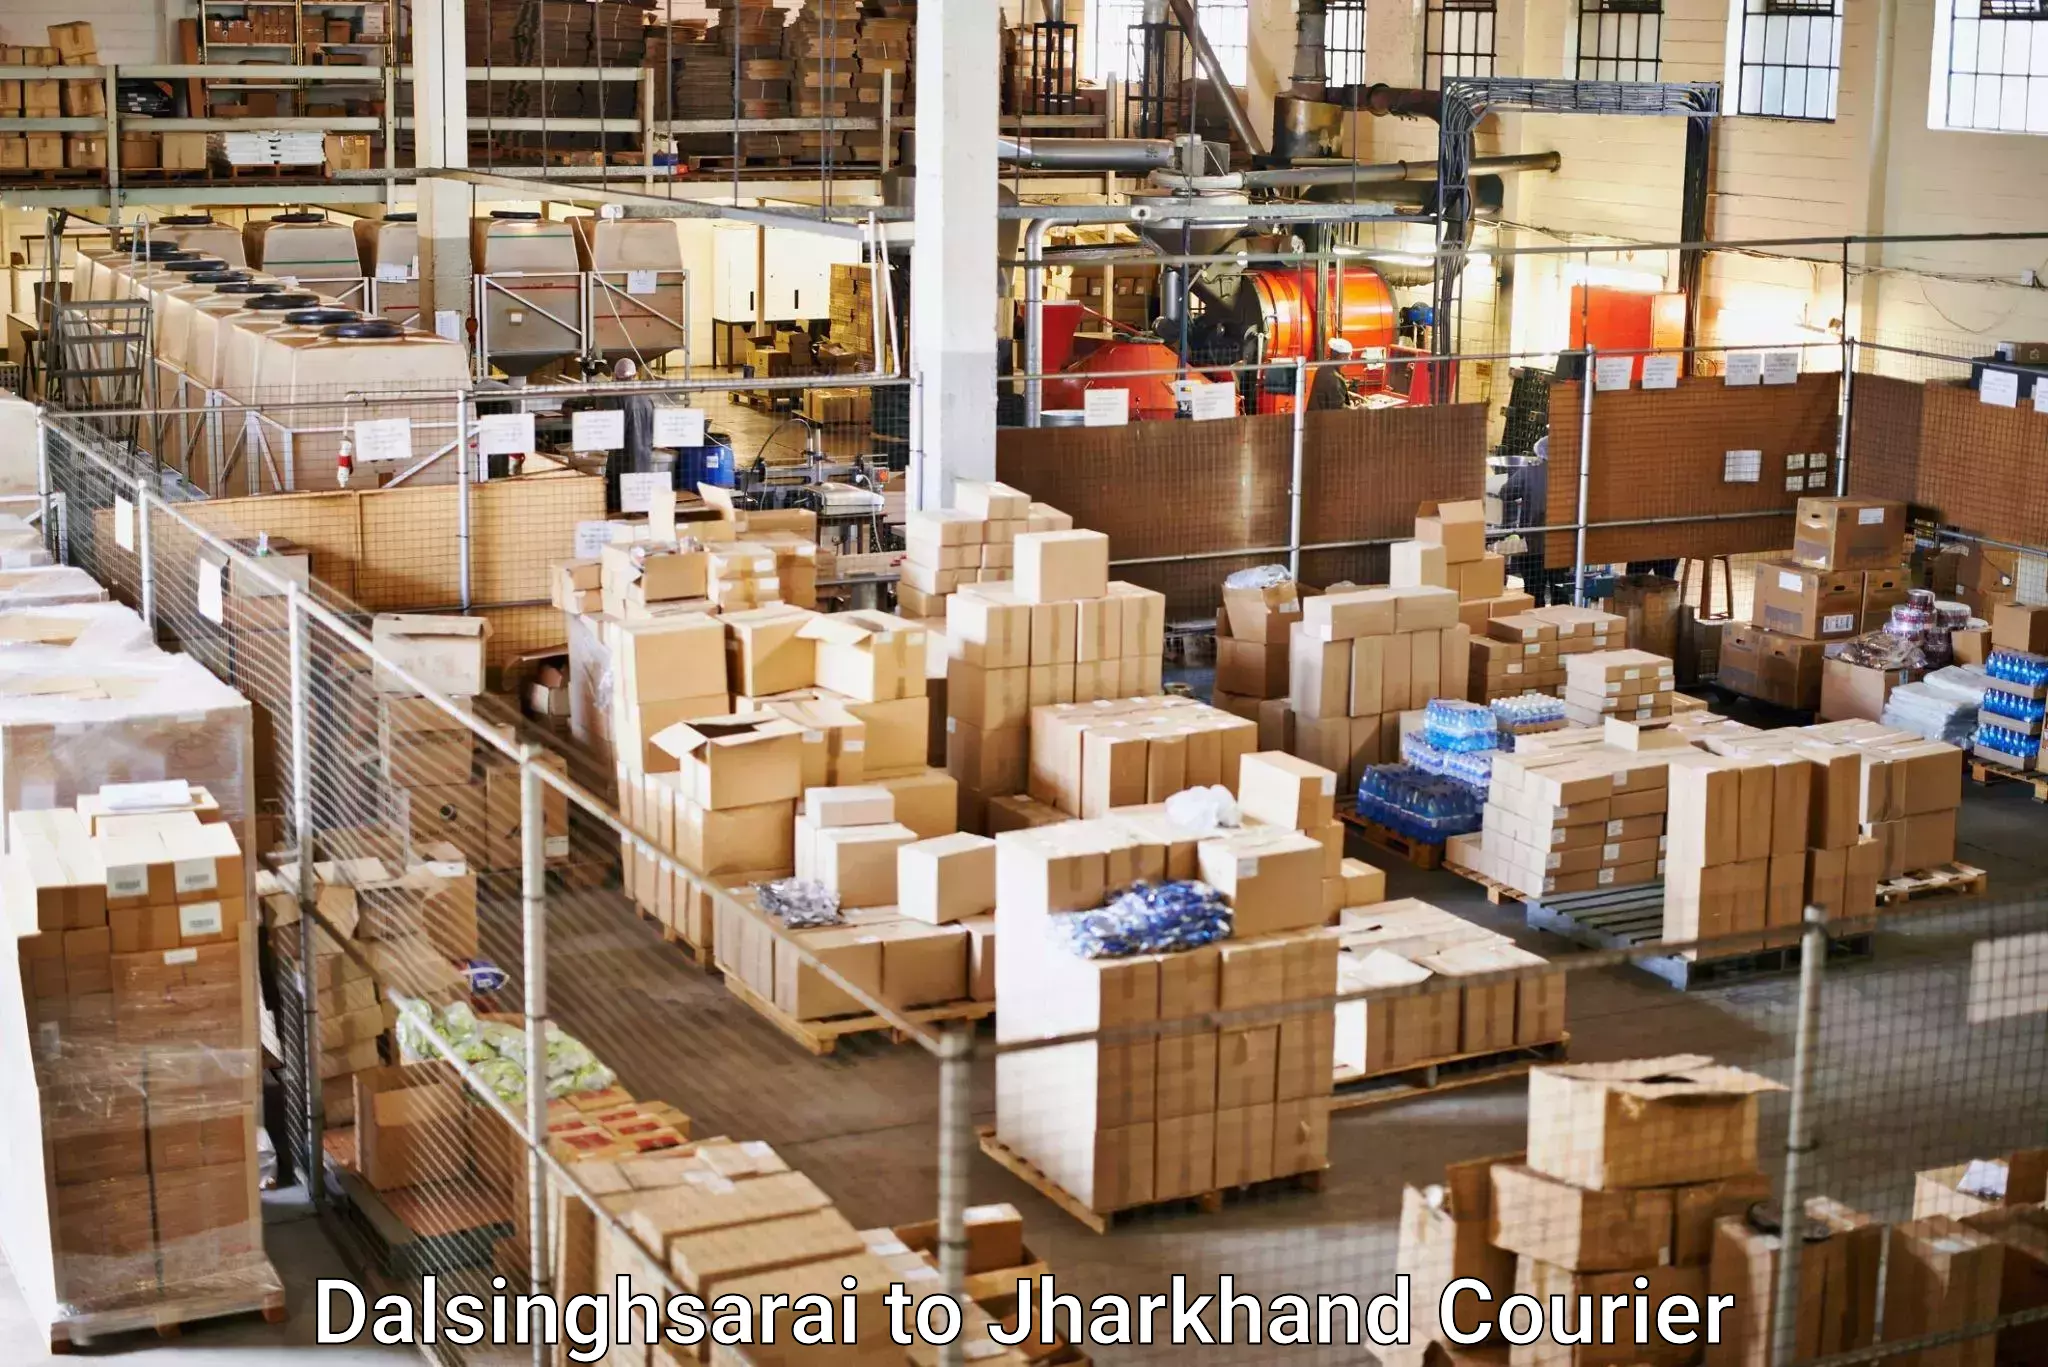 Global shipping networks Dalsinghsarai to Gumia